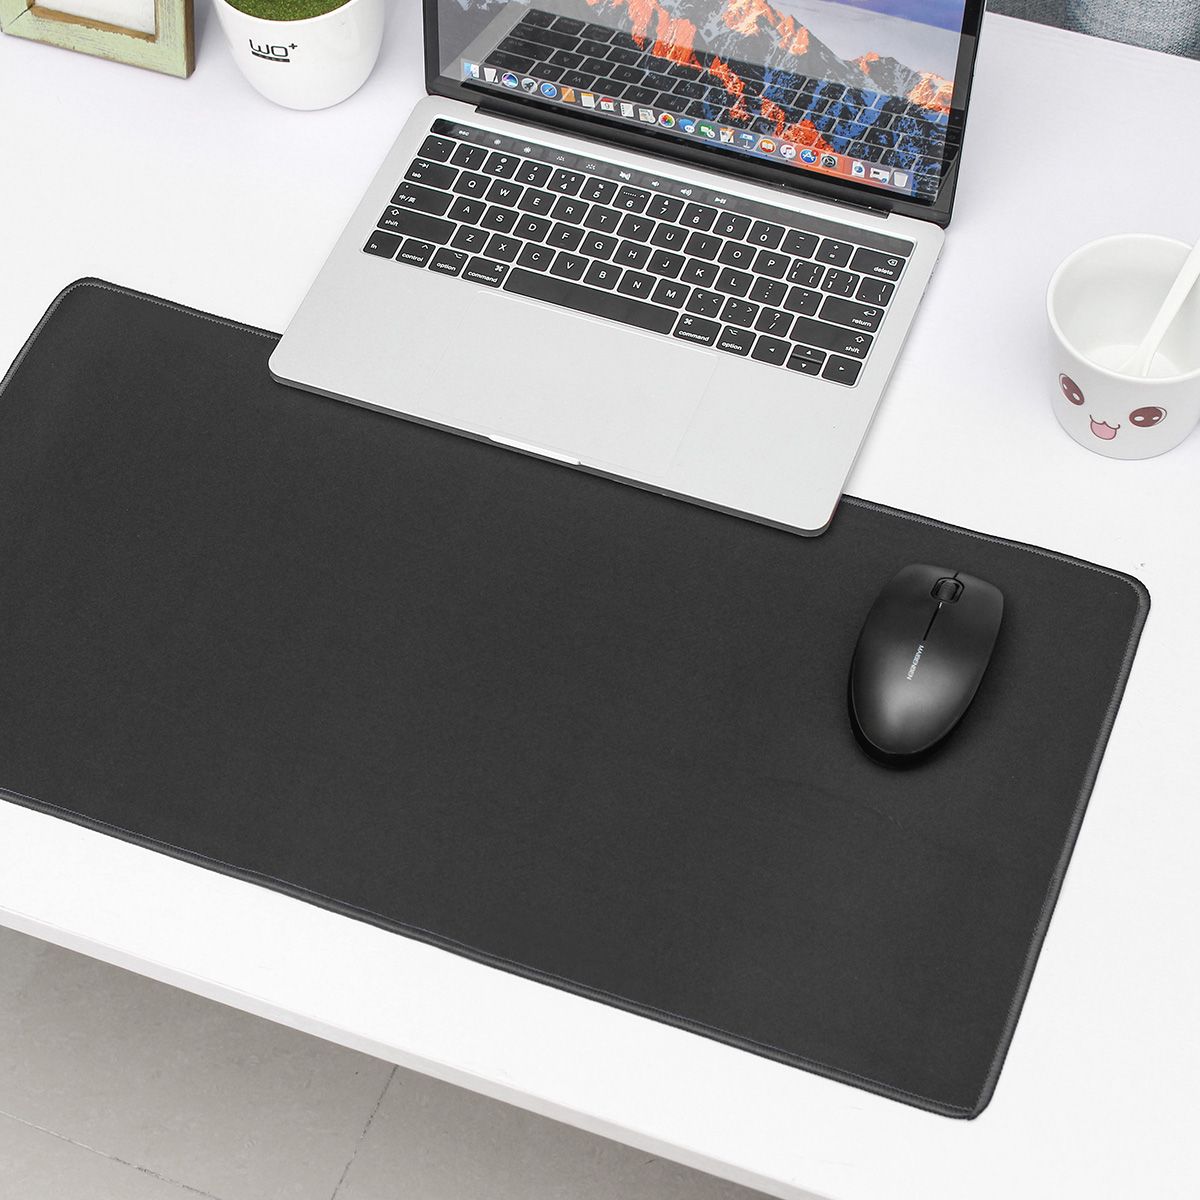 PC-Laptop-Computer-Rubber-Gaming-Mouse-Pad-with-Large-Size-1503314